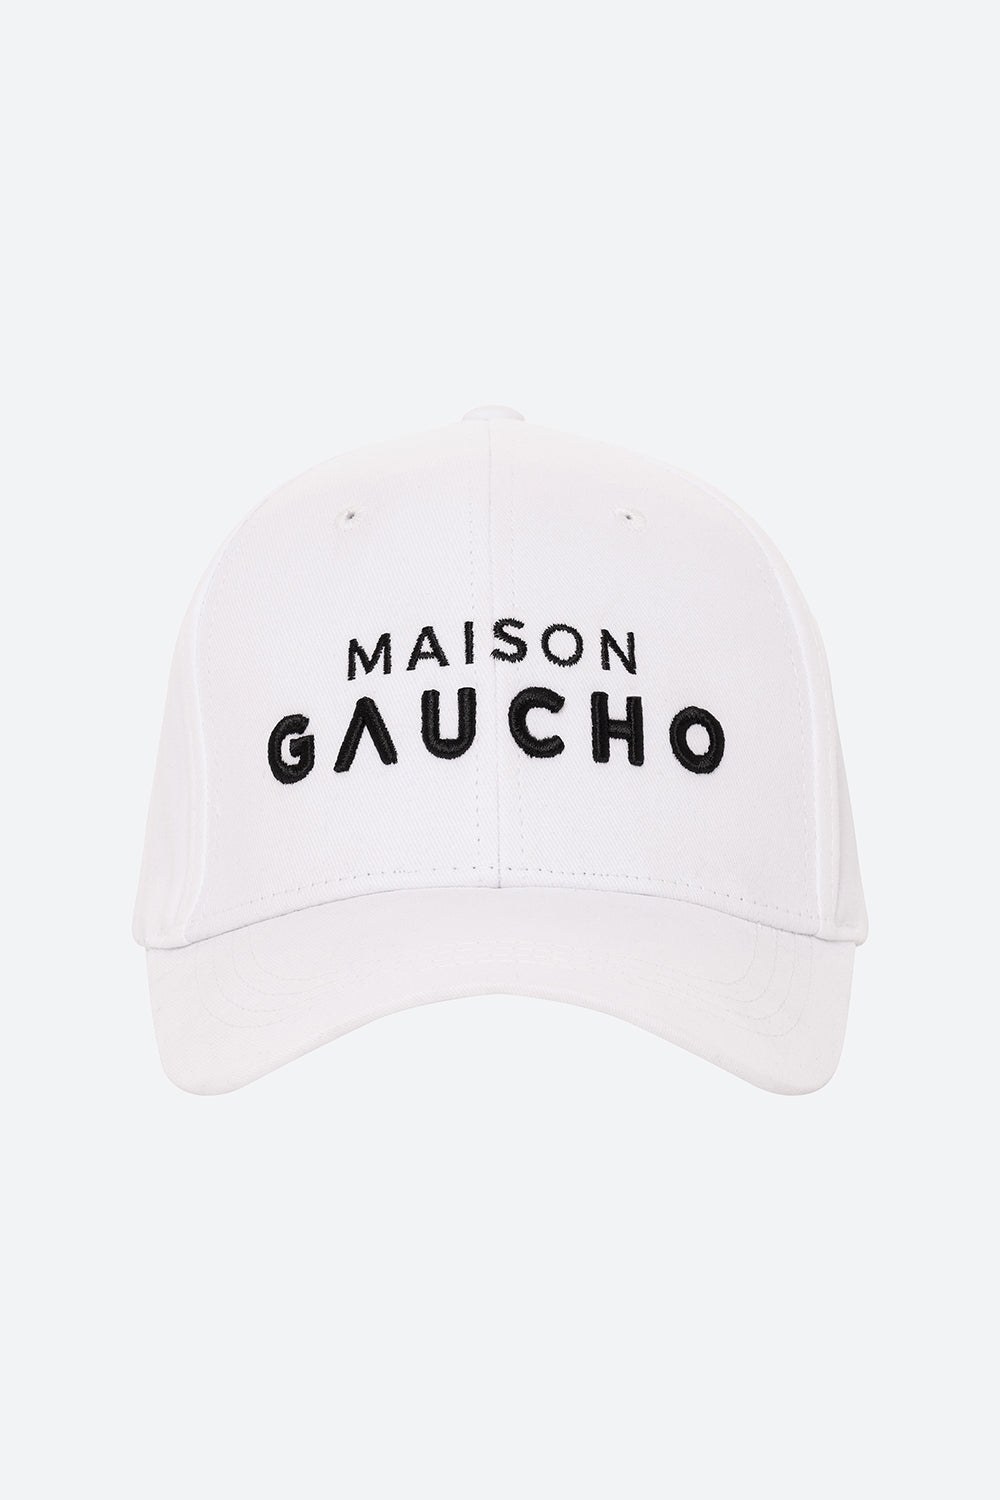 Women's Maison Gaucho Cap in White with Black Embroidery